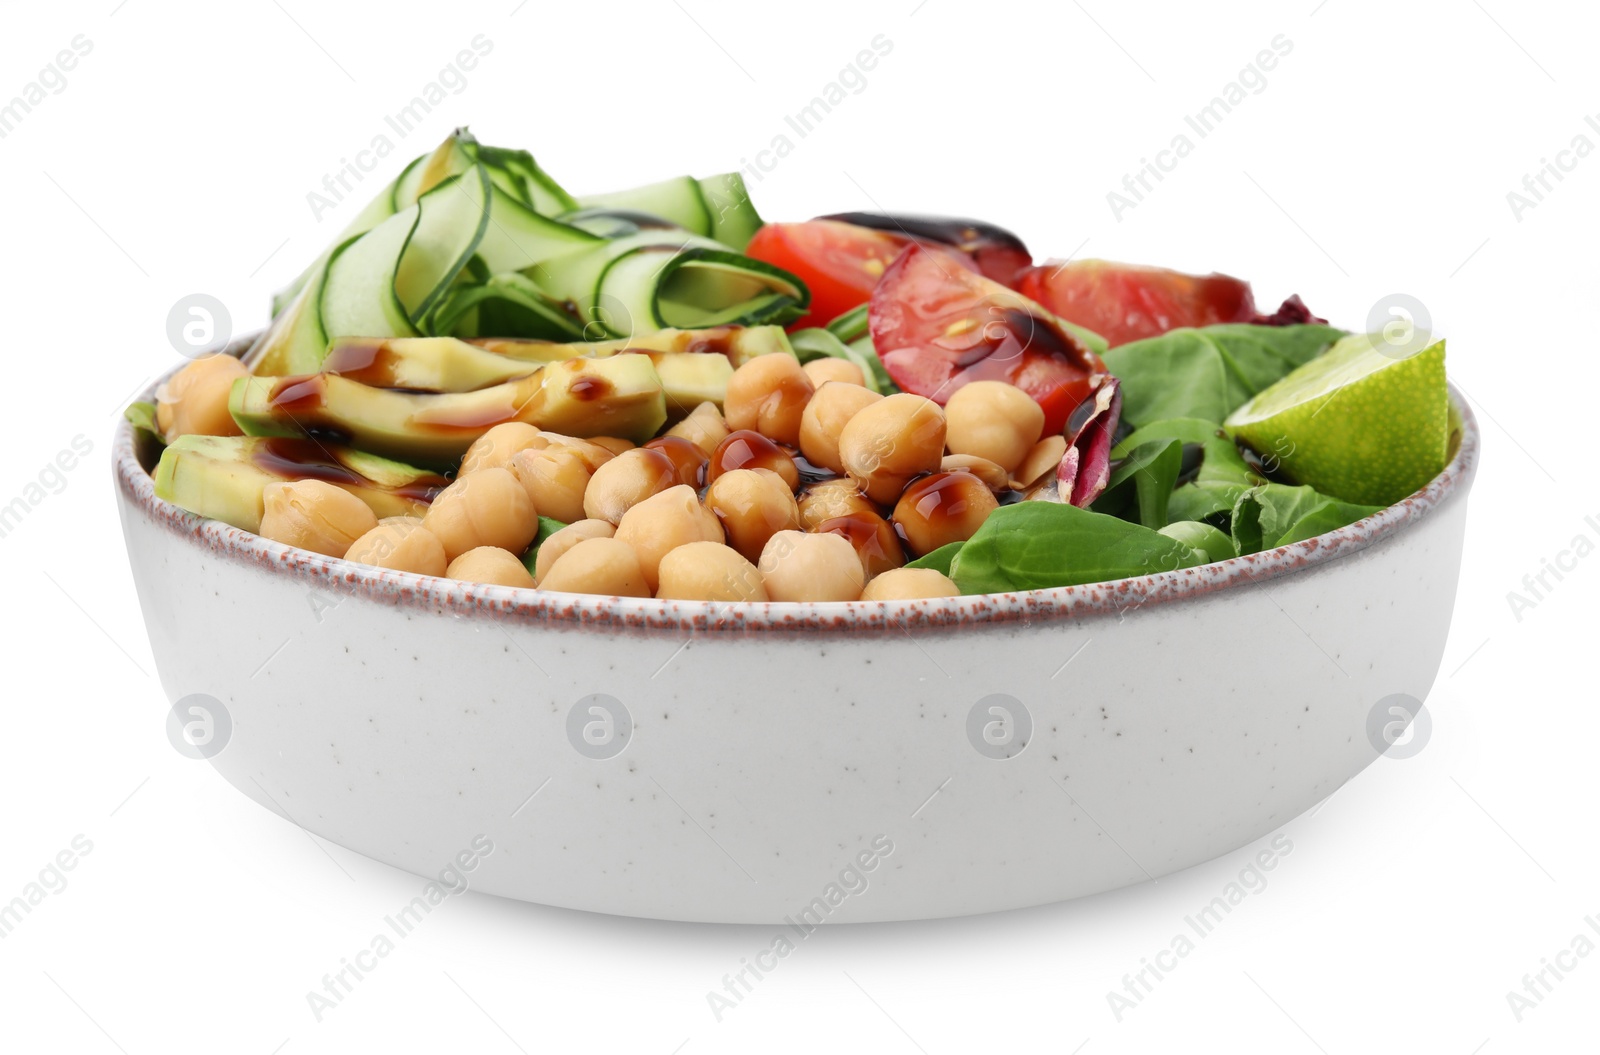 Photo of Delicious salad with chickpeas, vegetables and balsamic vinegar in bowl isolated on white